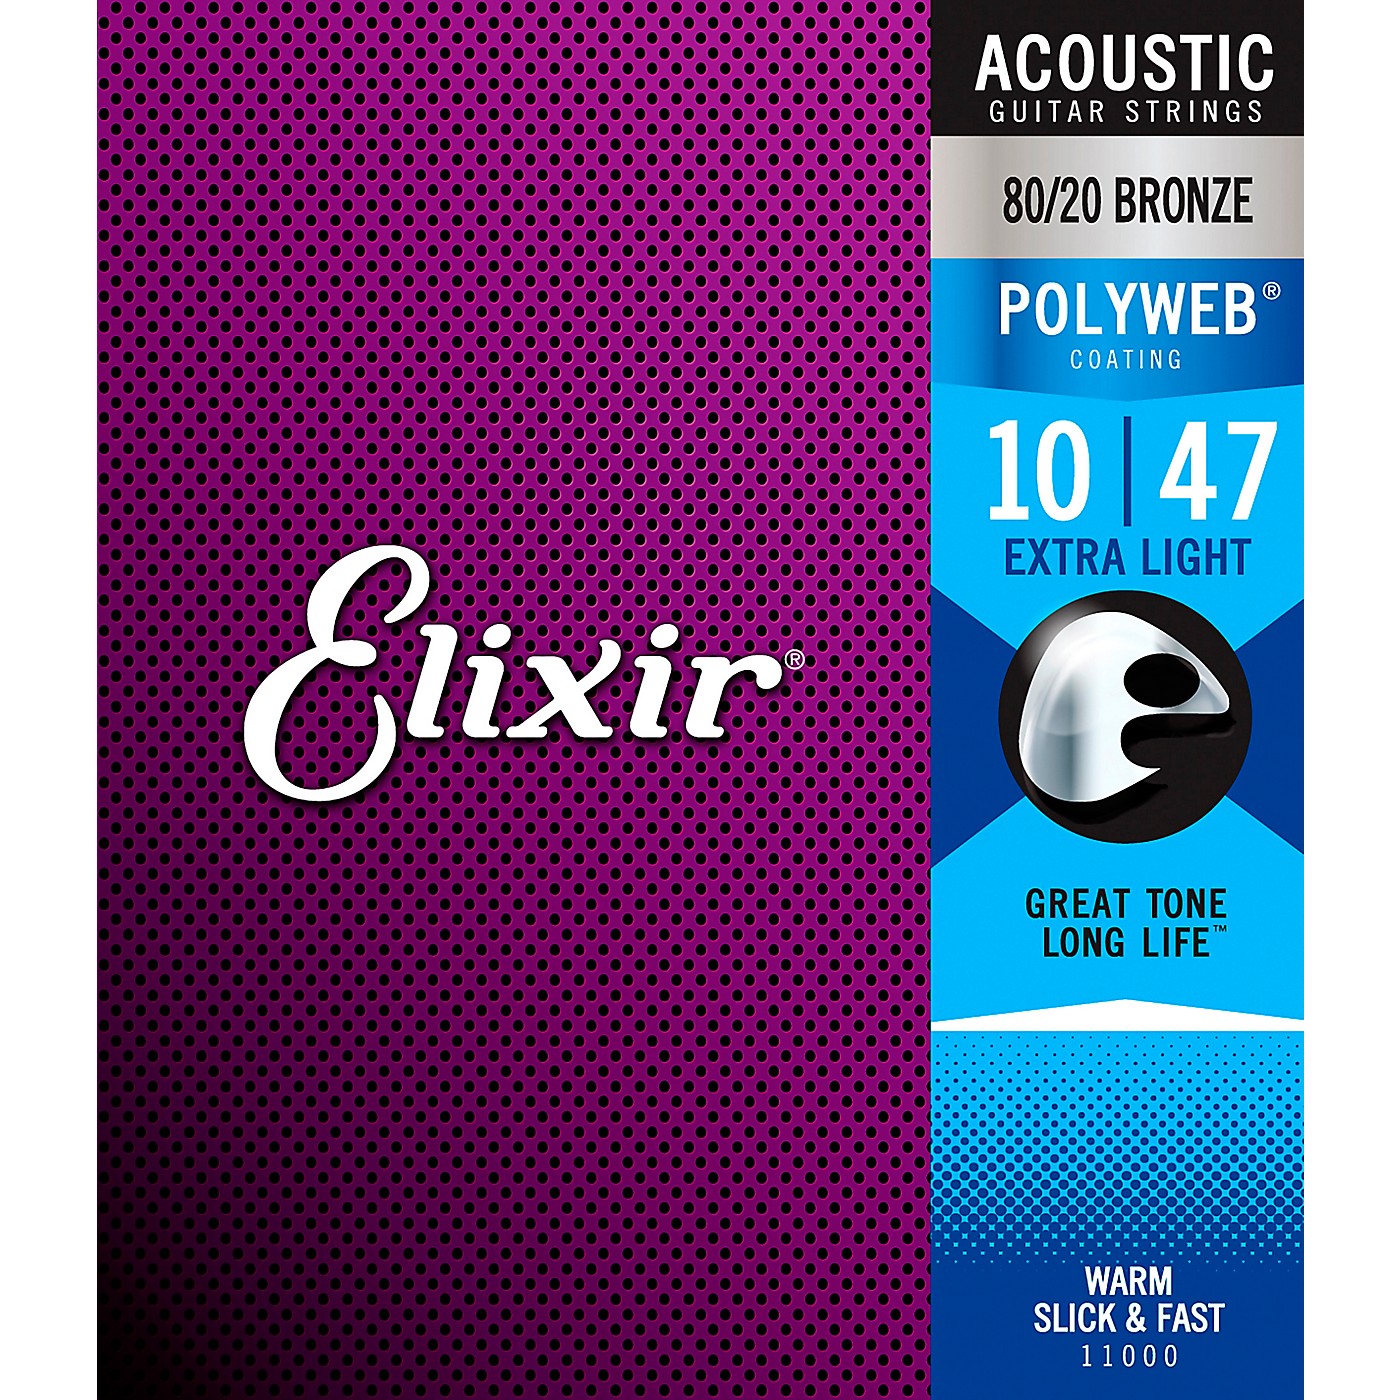 Elixir 80/20 Bronze Acoustic Guitar Strings with POLYWEB Coating, Extra Light (.010-.047) thumbnail